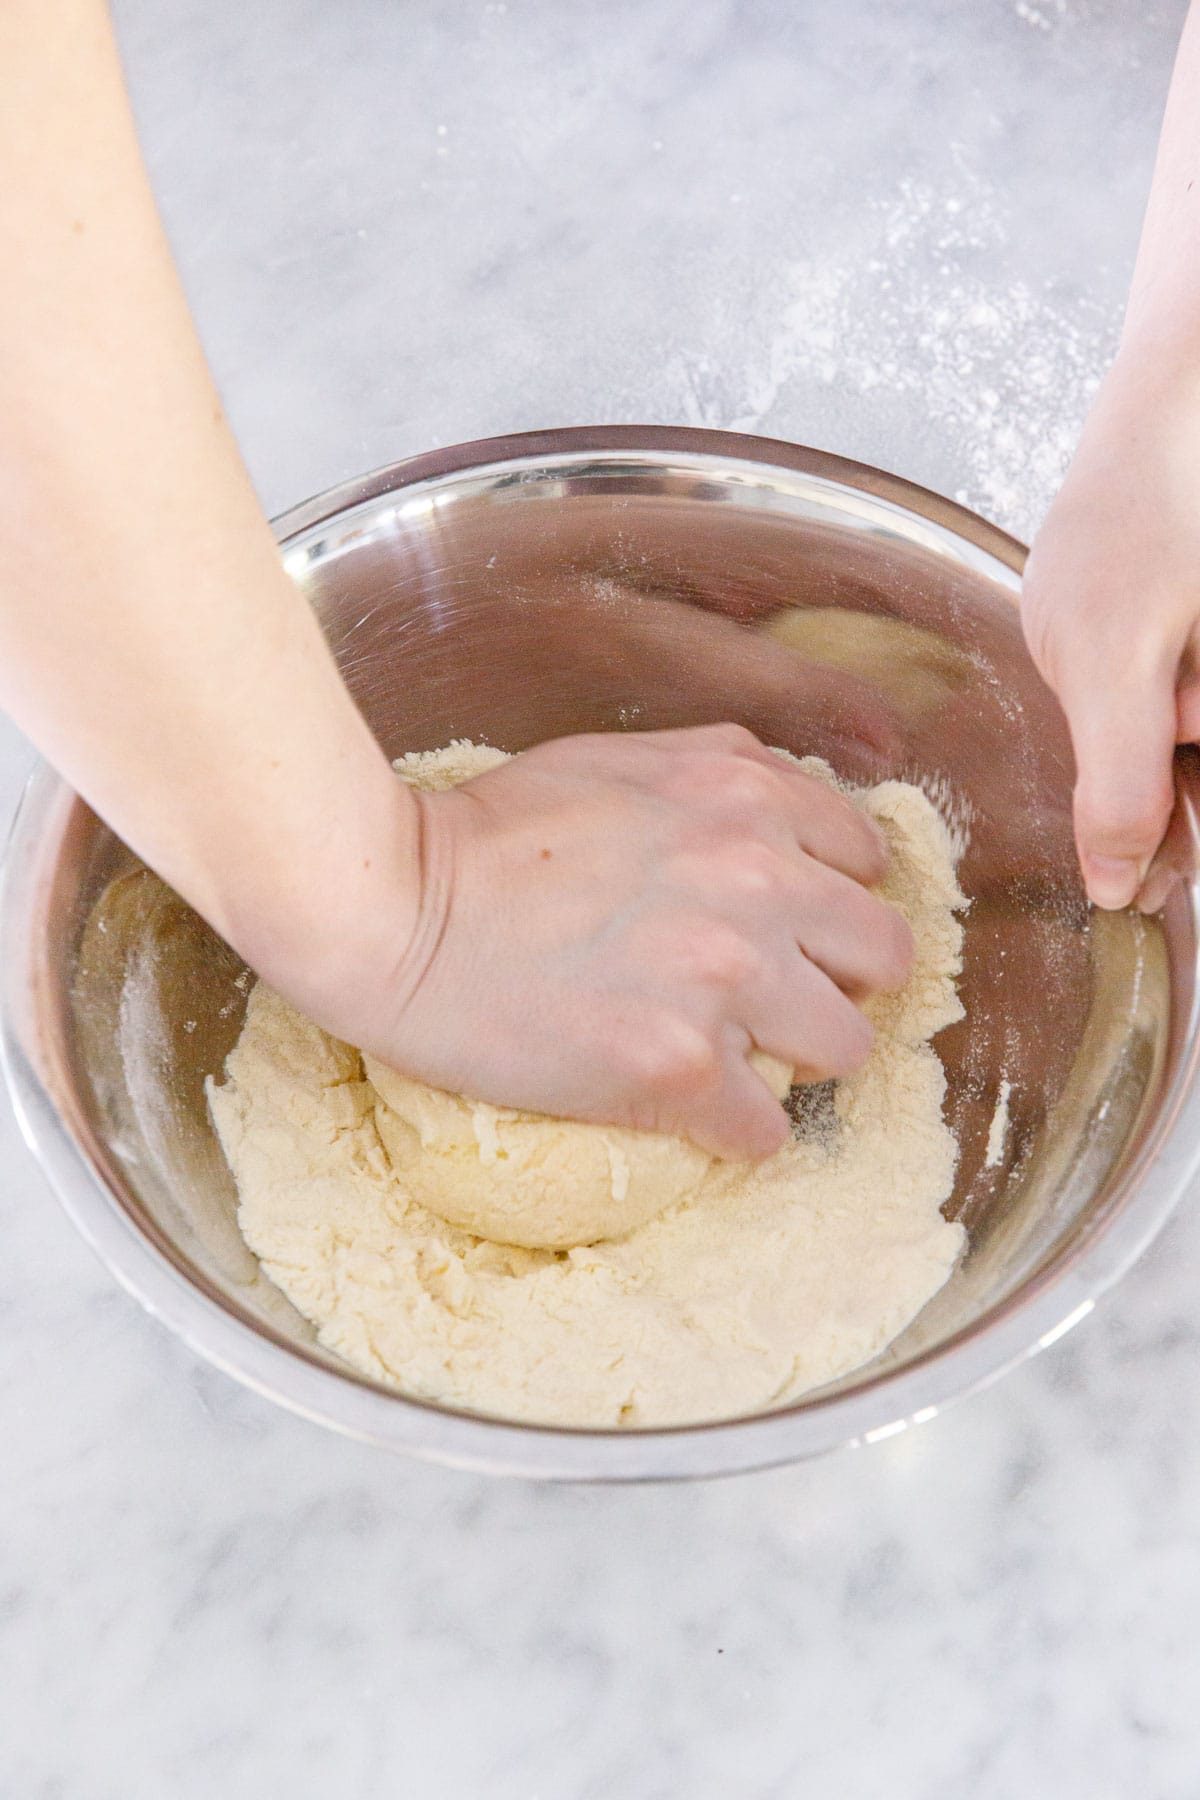 Kneading homemade pasta dough until it comes together.